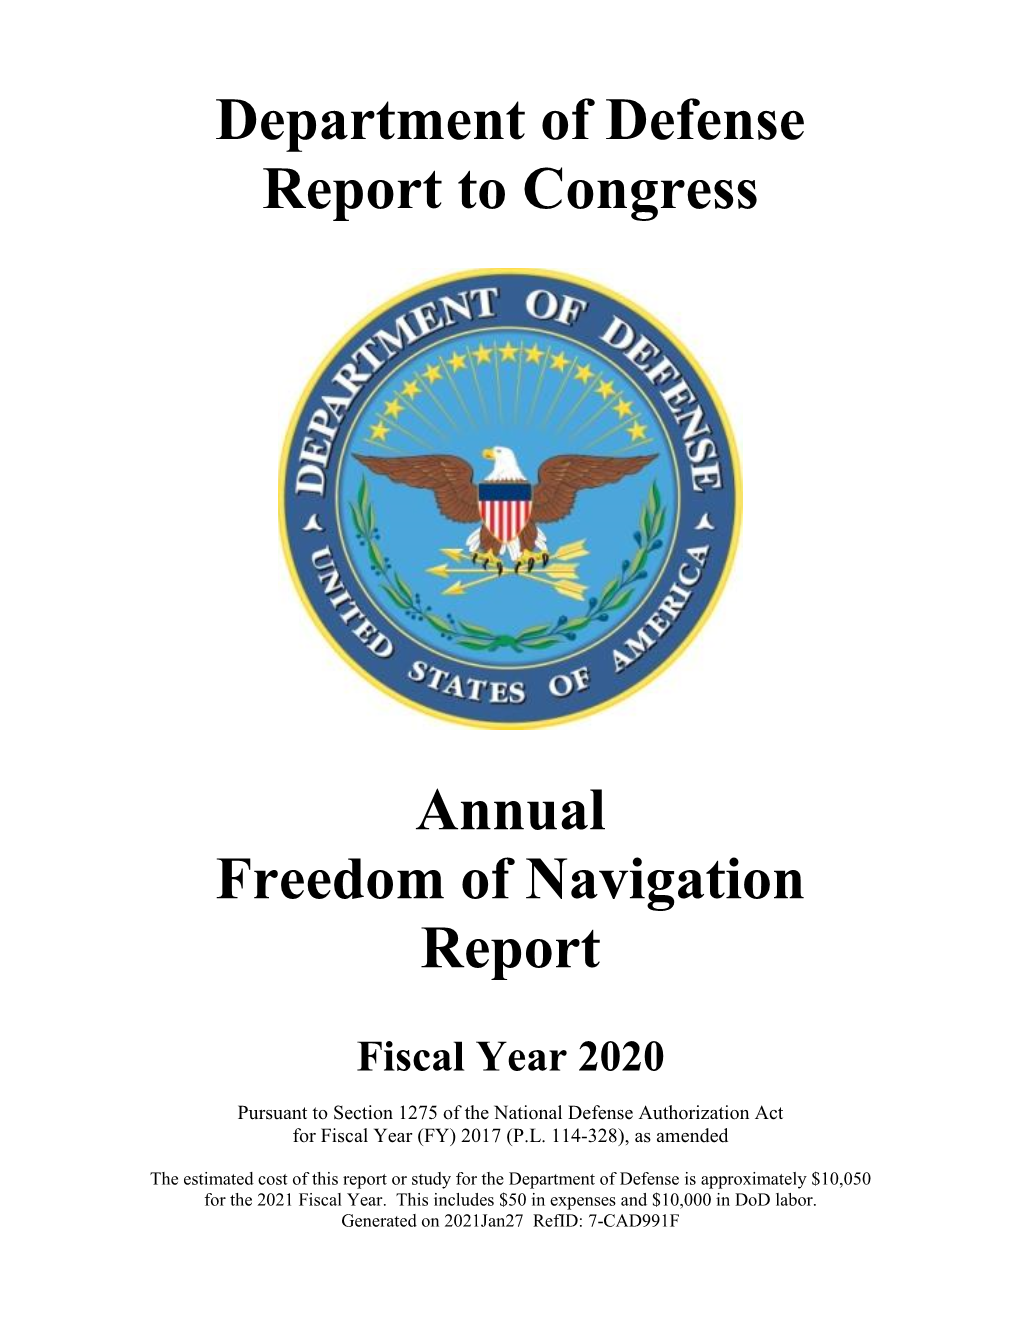 Annual Freedom of Navigation Report